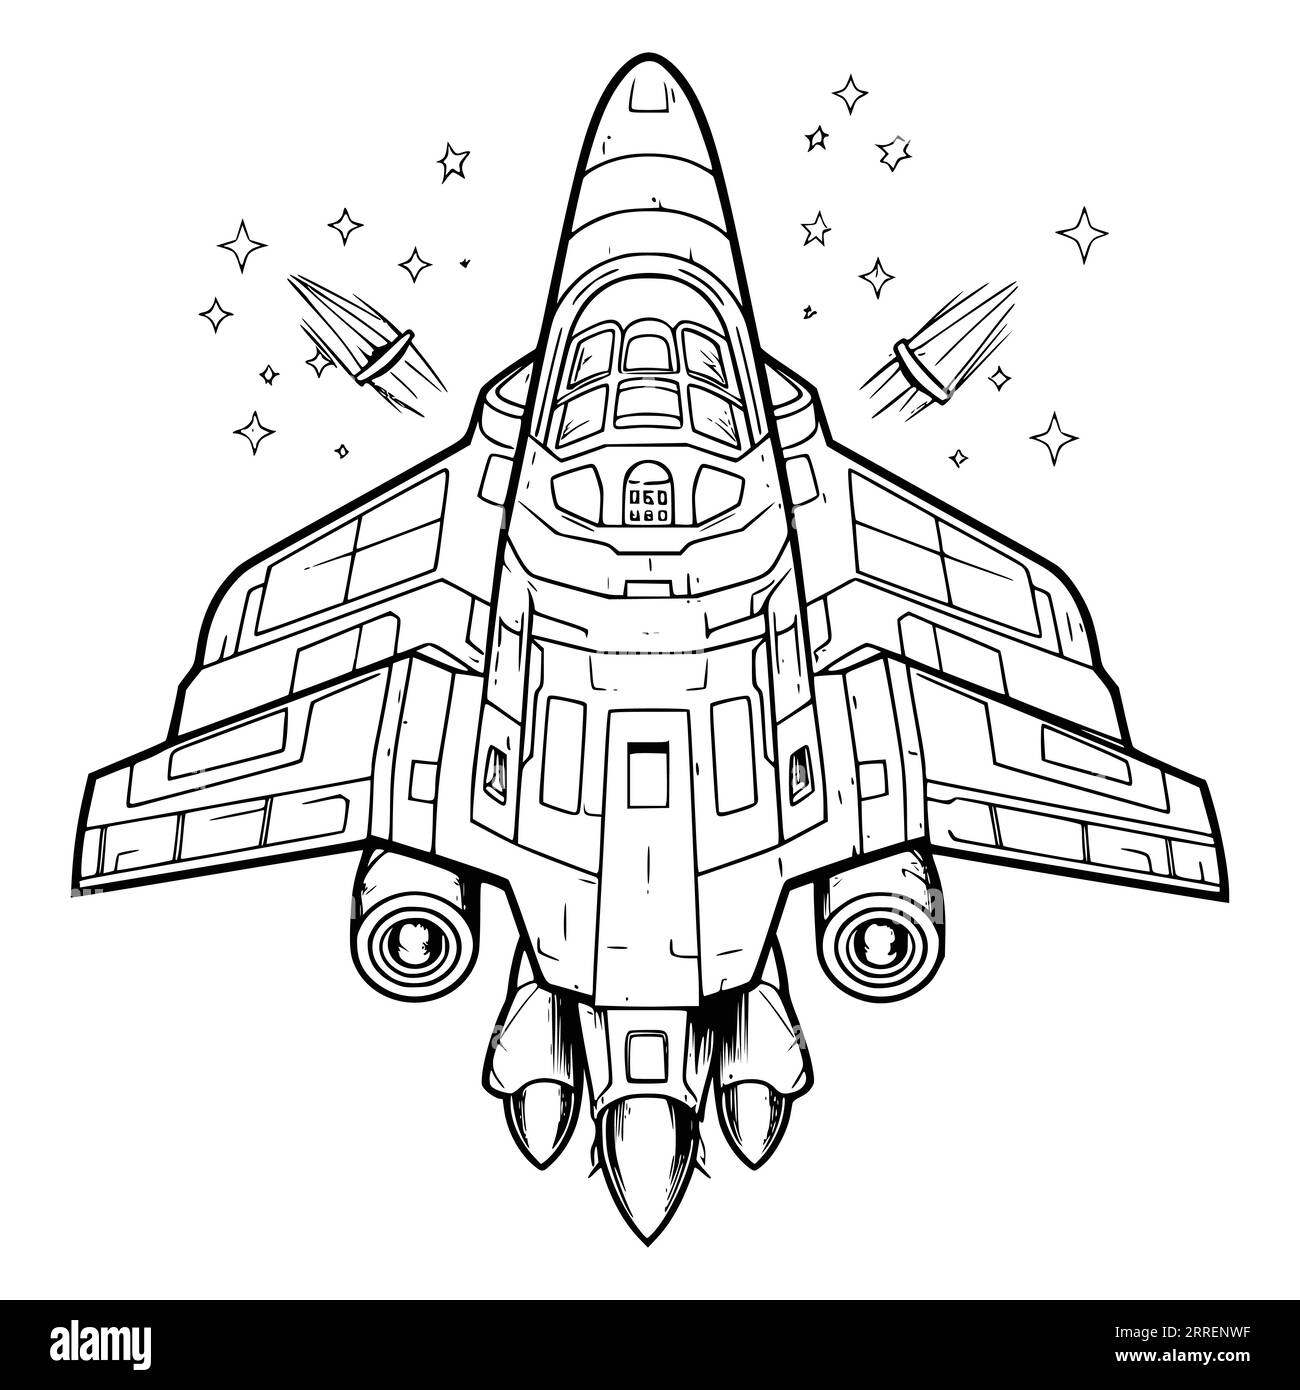 Starship Or Rocket With Pilot Coloring Page for Kids Stock Vector